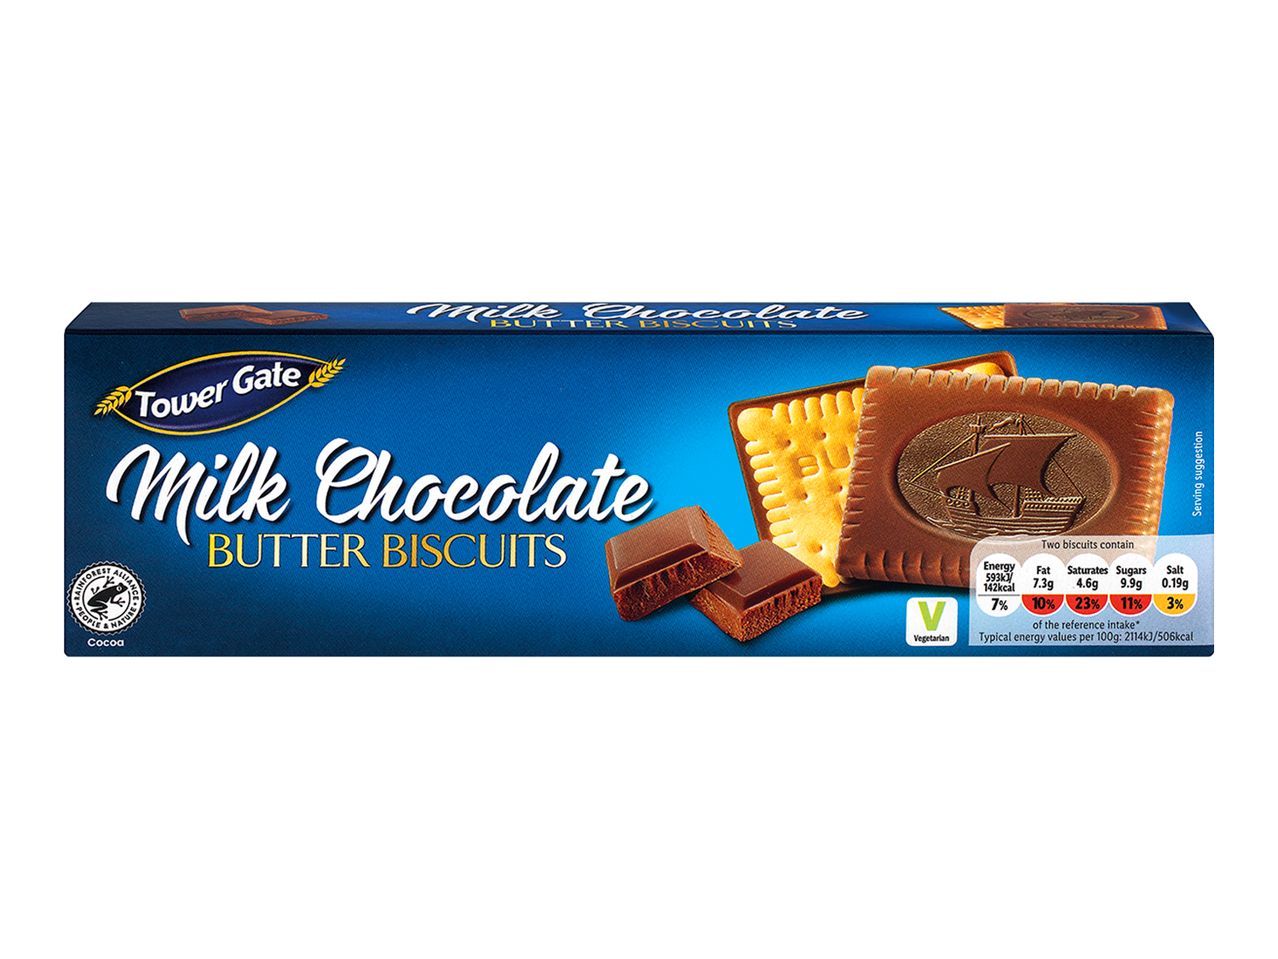 Go to full screen view: Tower Gate Milk Chocolate Butter Biscuits - Image 1